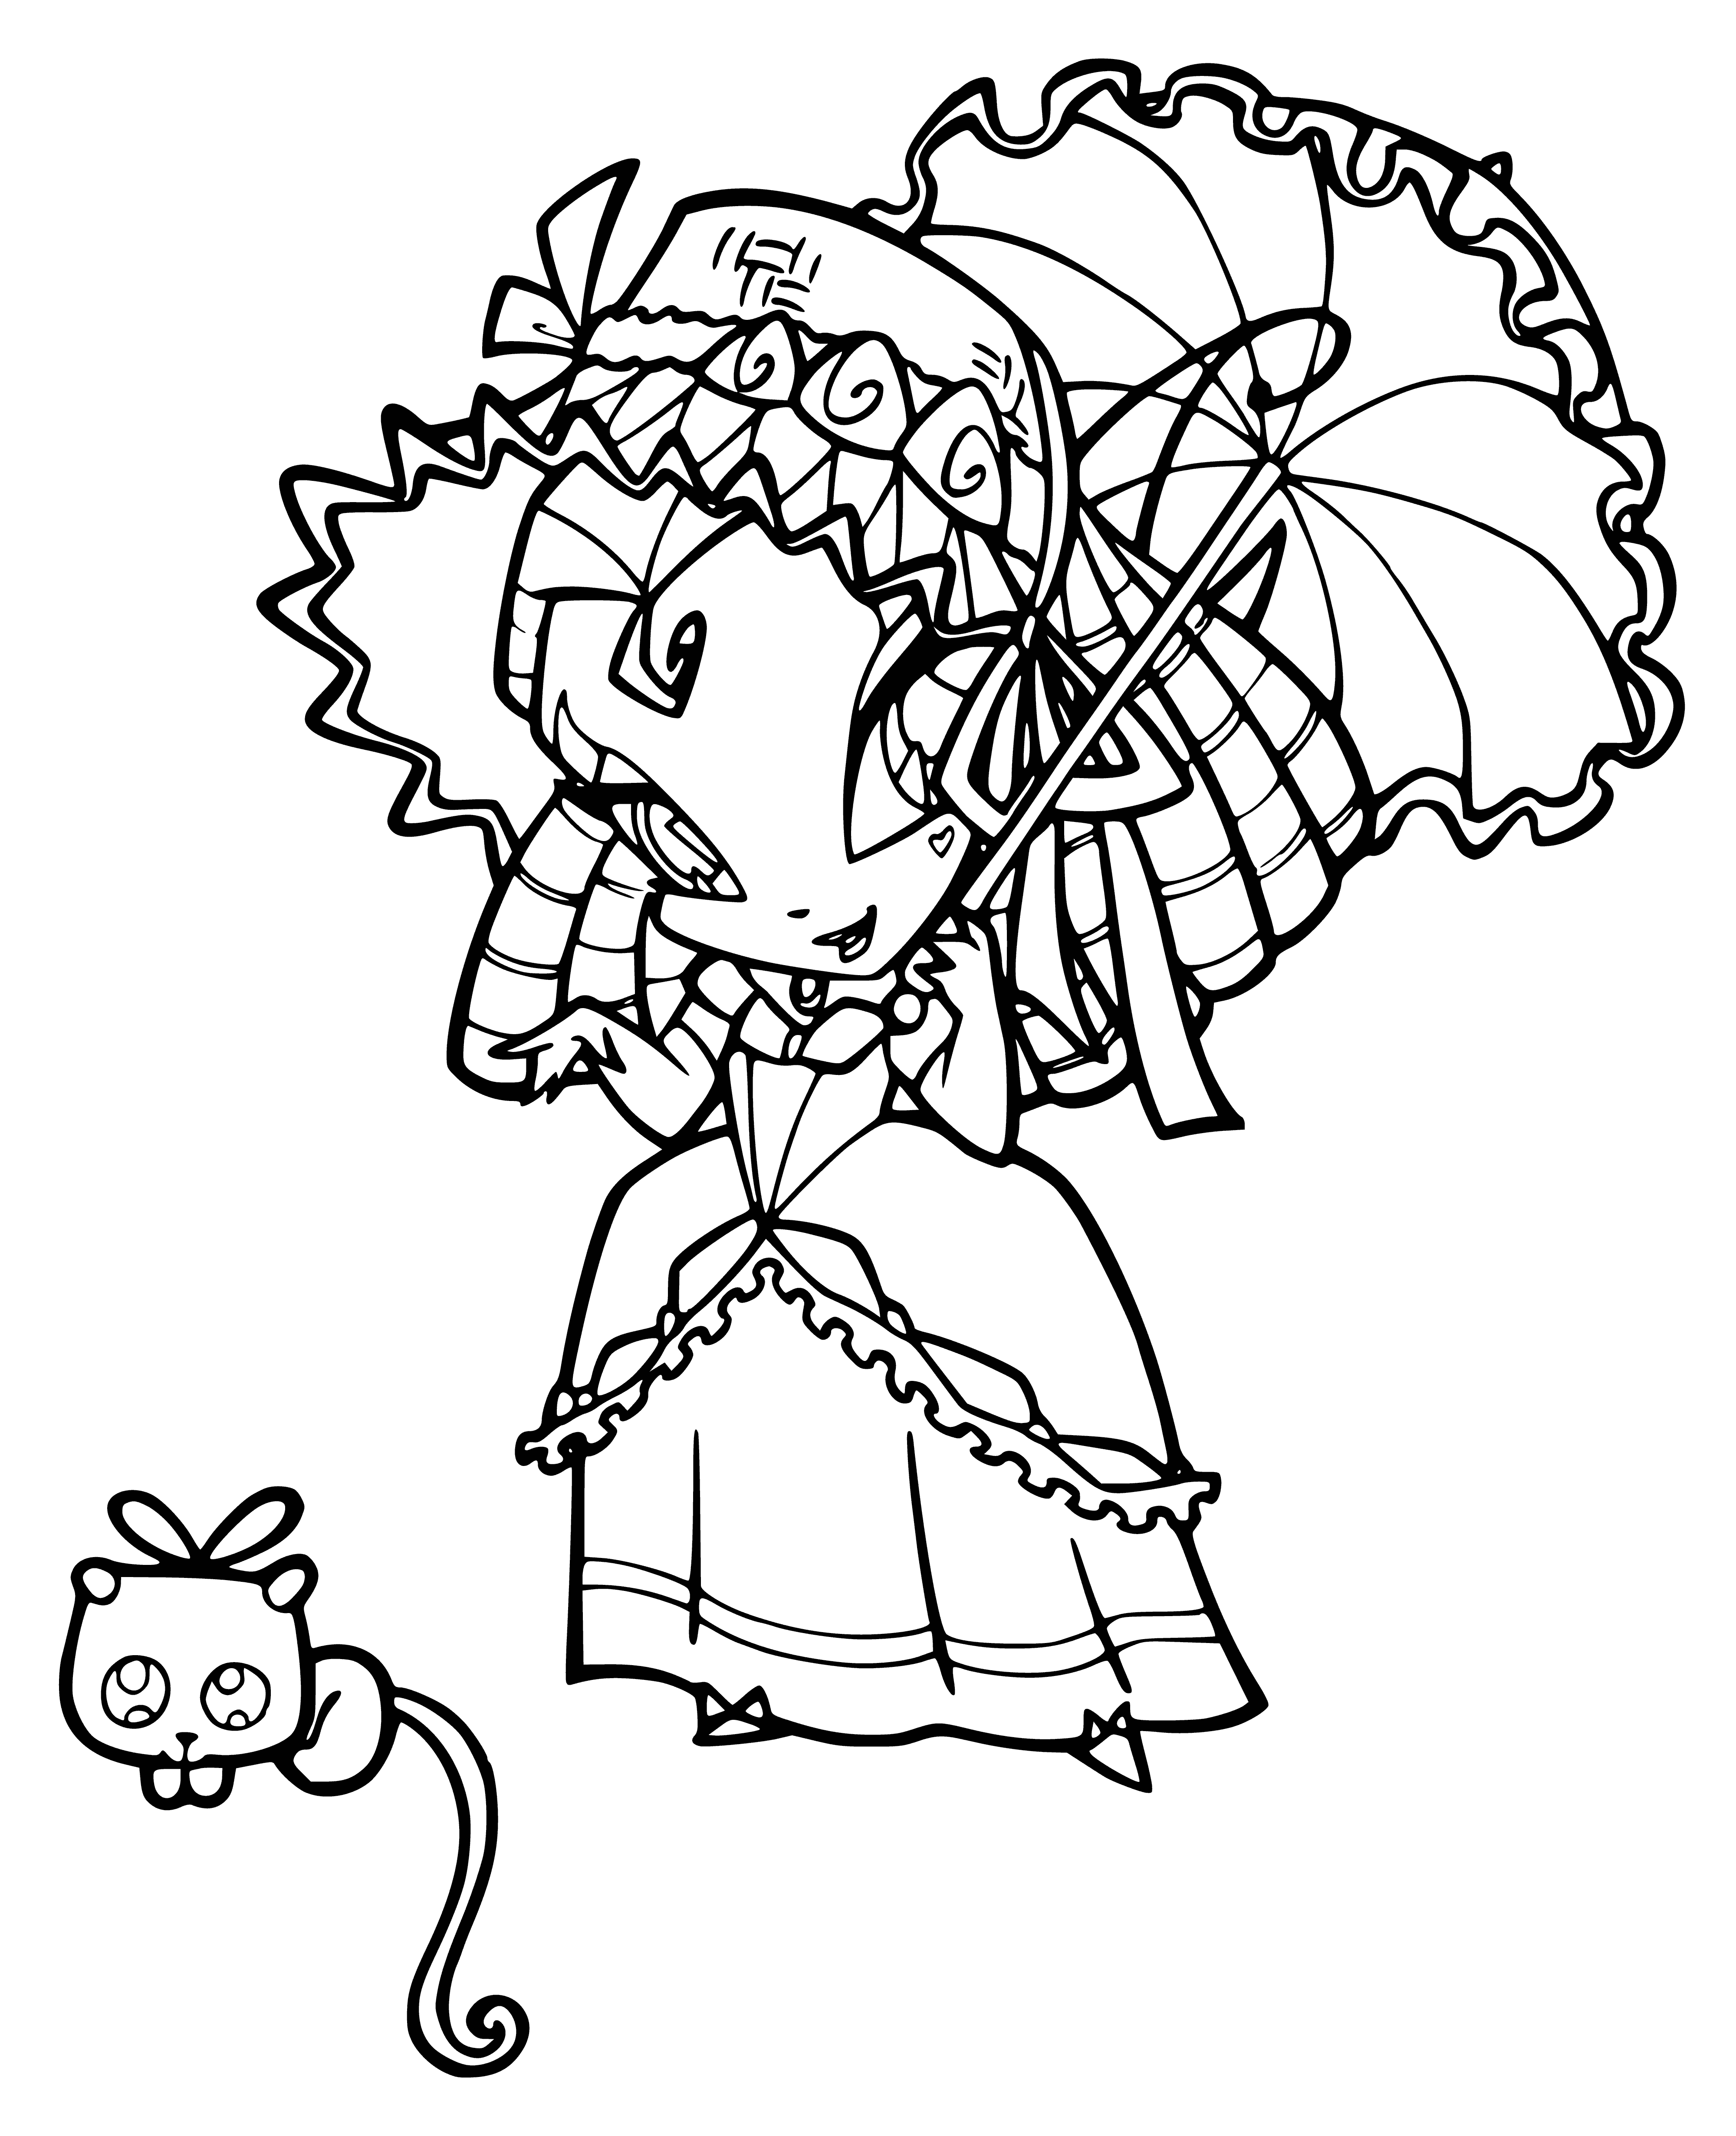 coloring page: Creature with pointy ears & wings sits on kitten. It wears a green tunic & holds a wooden staff. Sharp teeth & almond-shaped eyes show a mischievous grin.